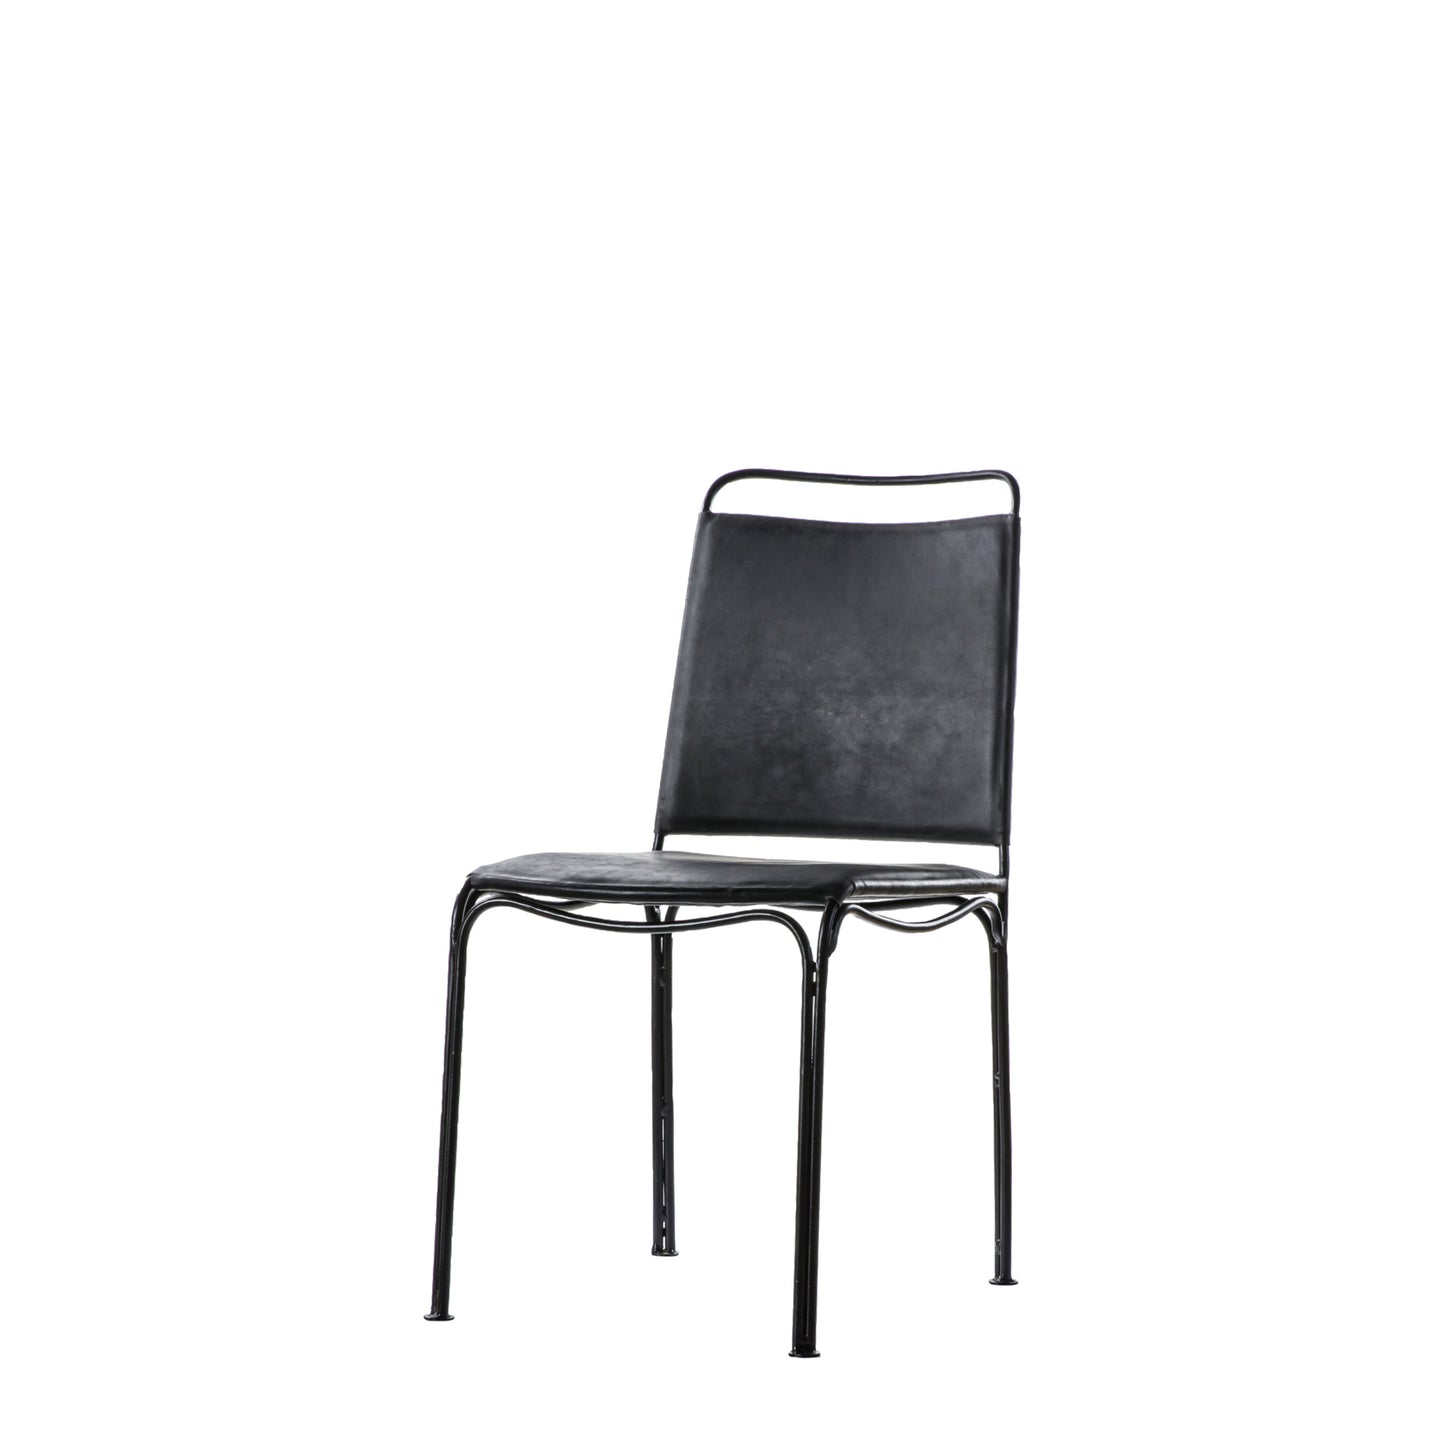 Petham Dining Chair | Black (2 Pack) 